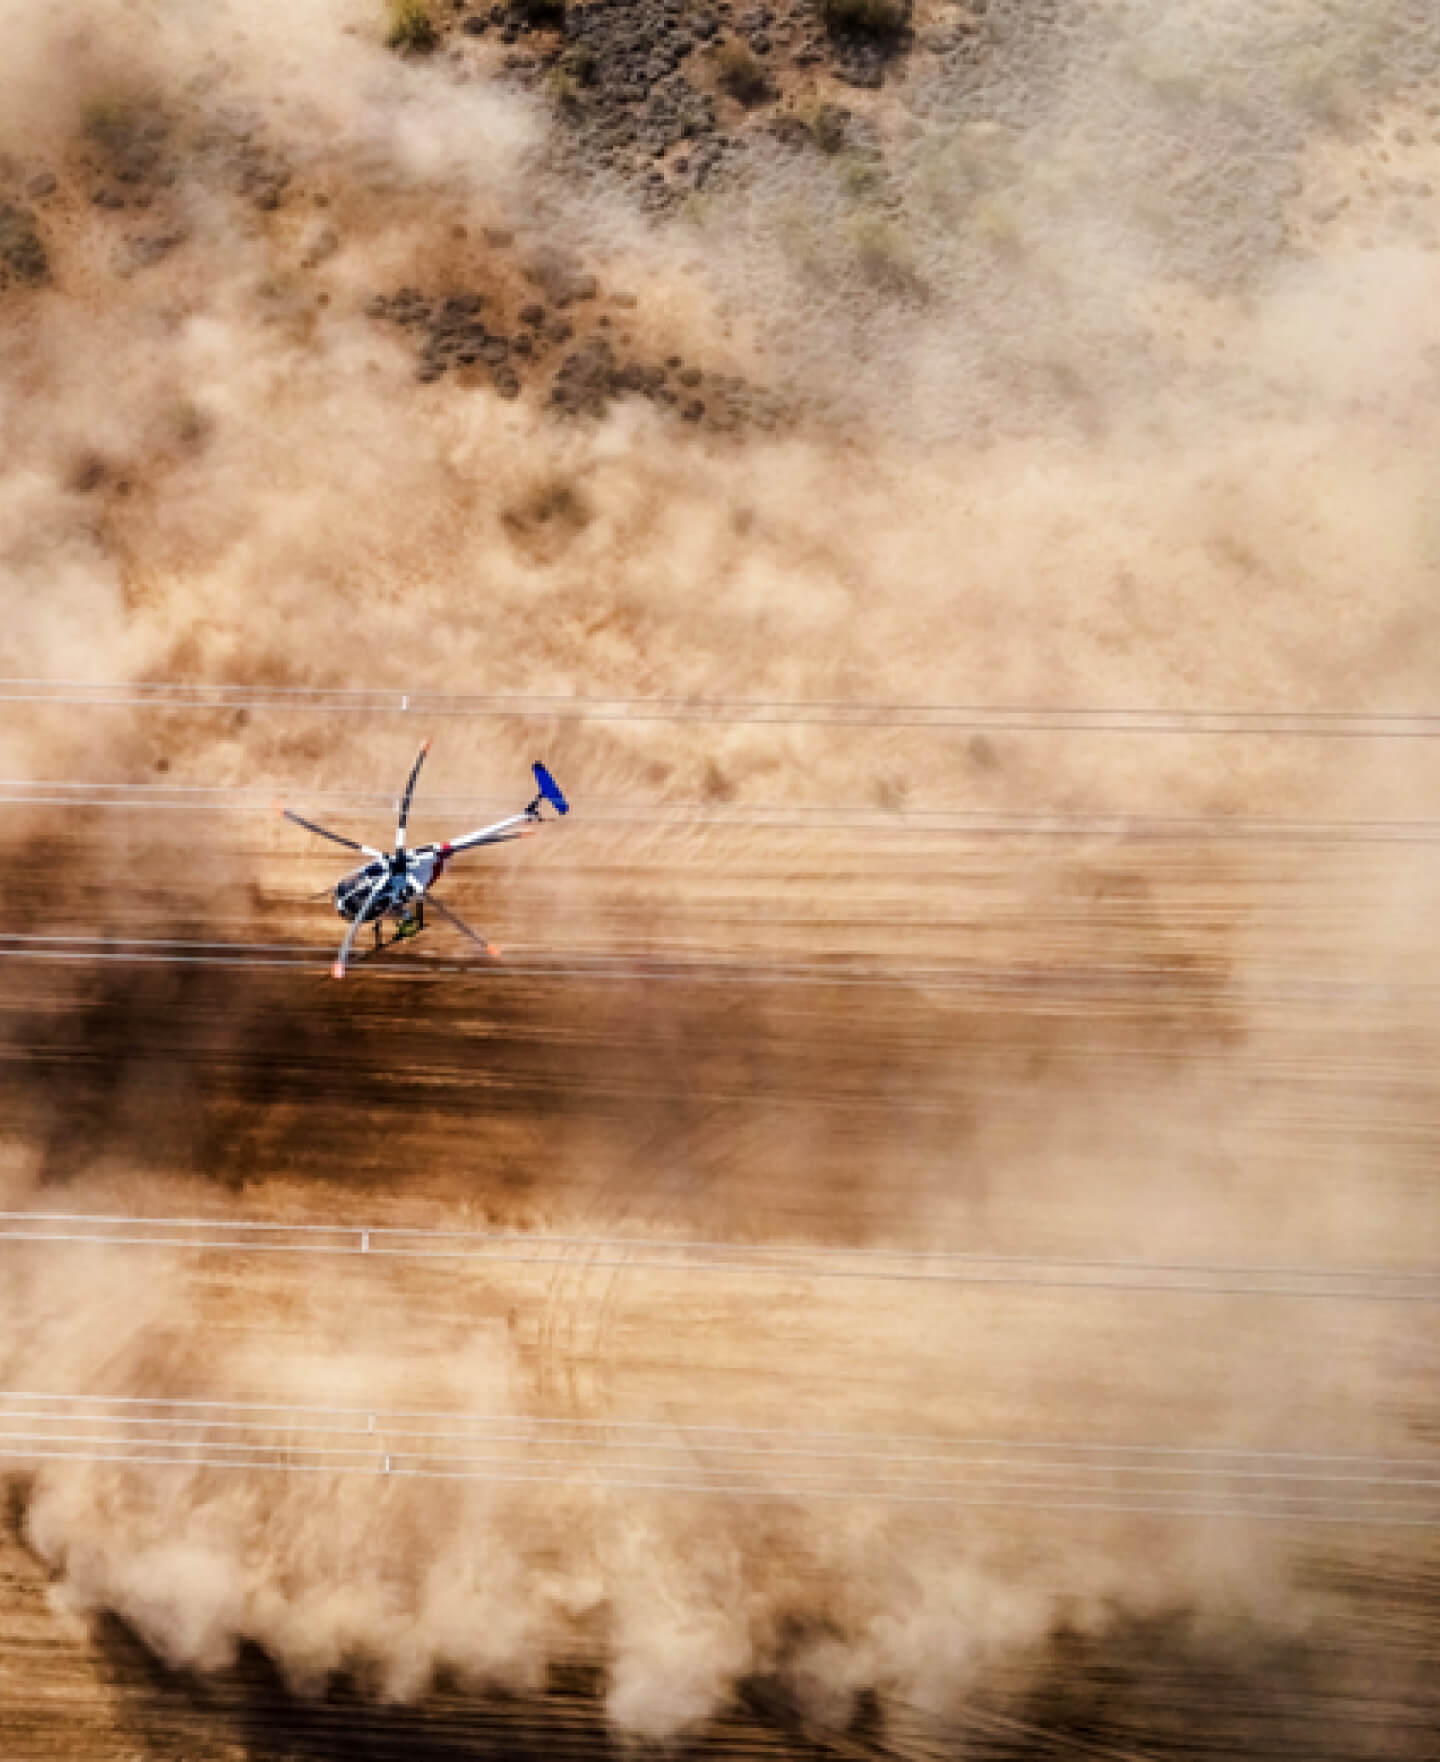 Rotorcraft in a dust storm